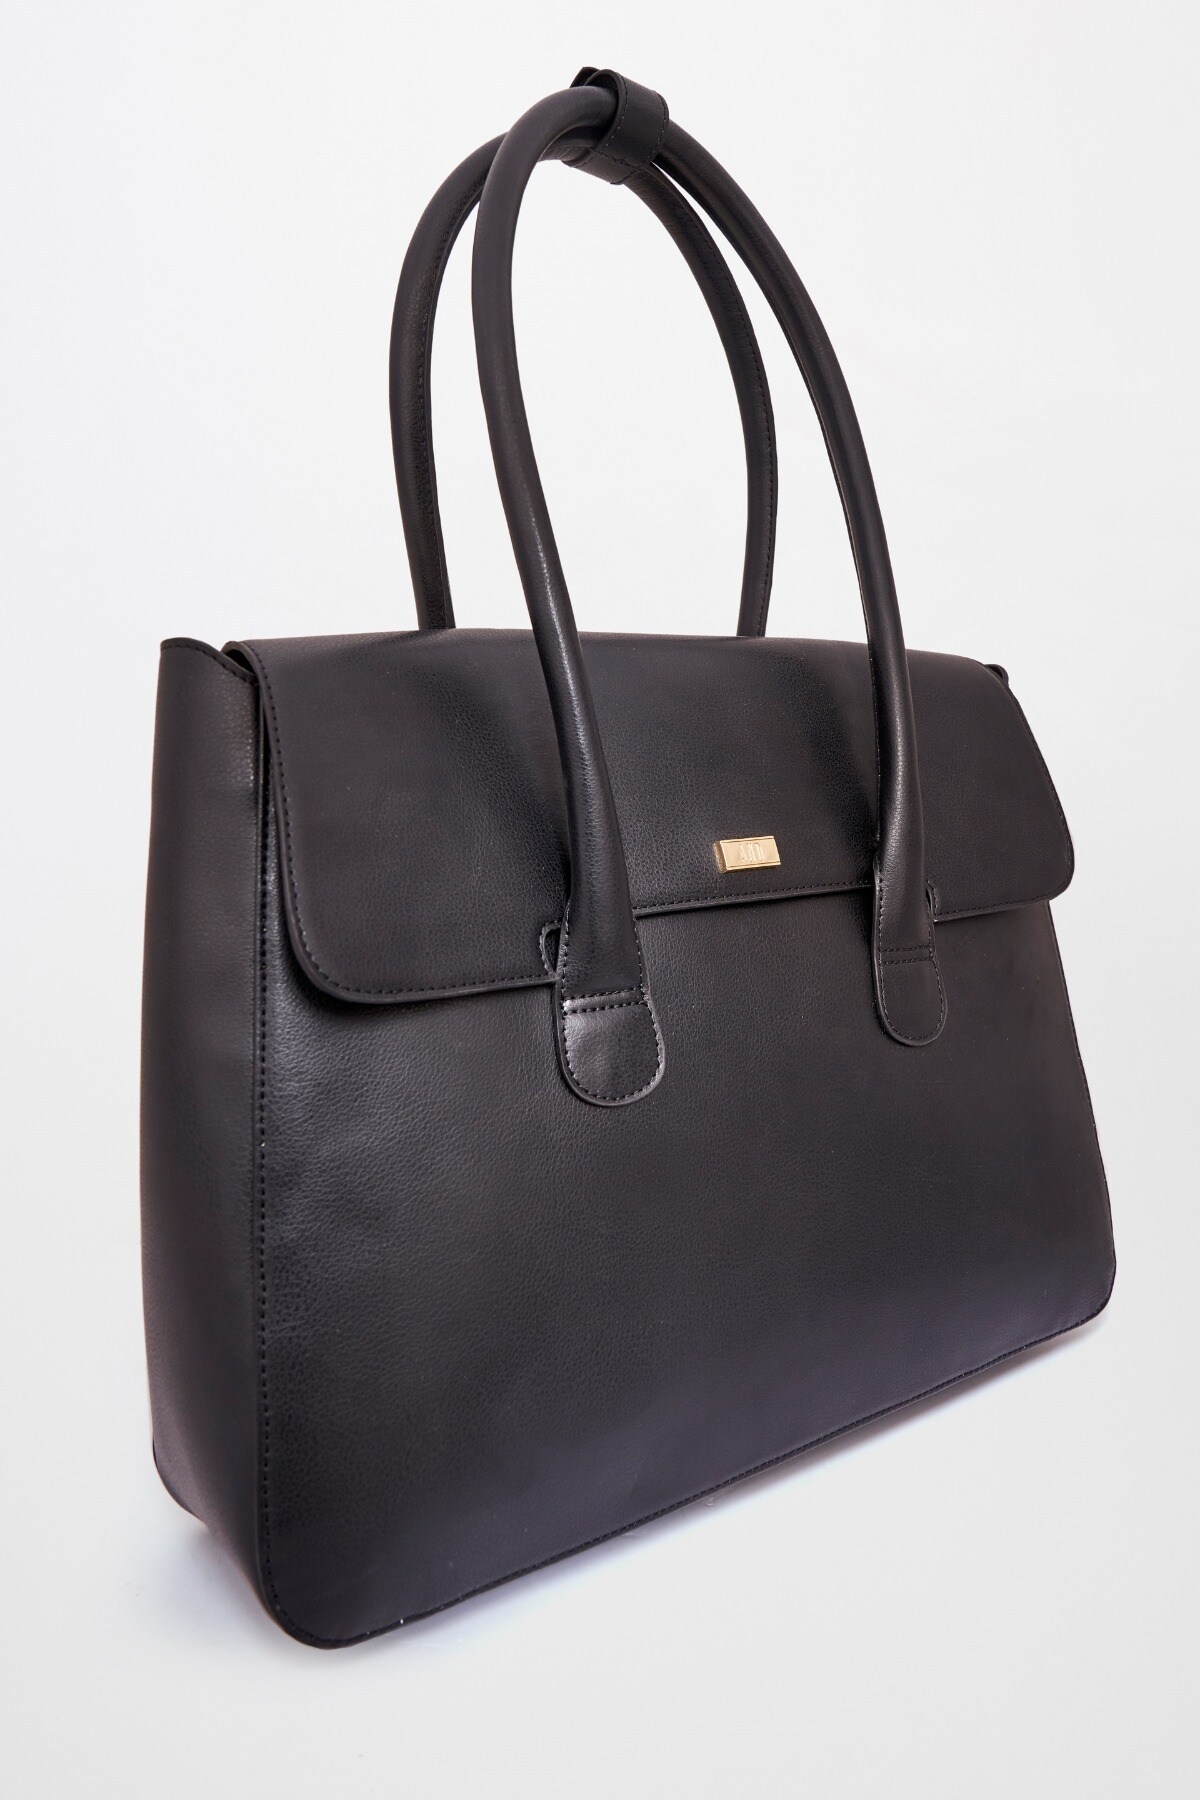 AND | Black Hand Bag For Women 0